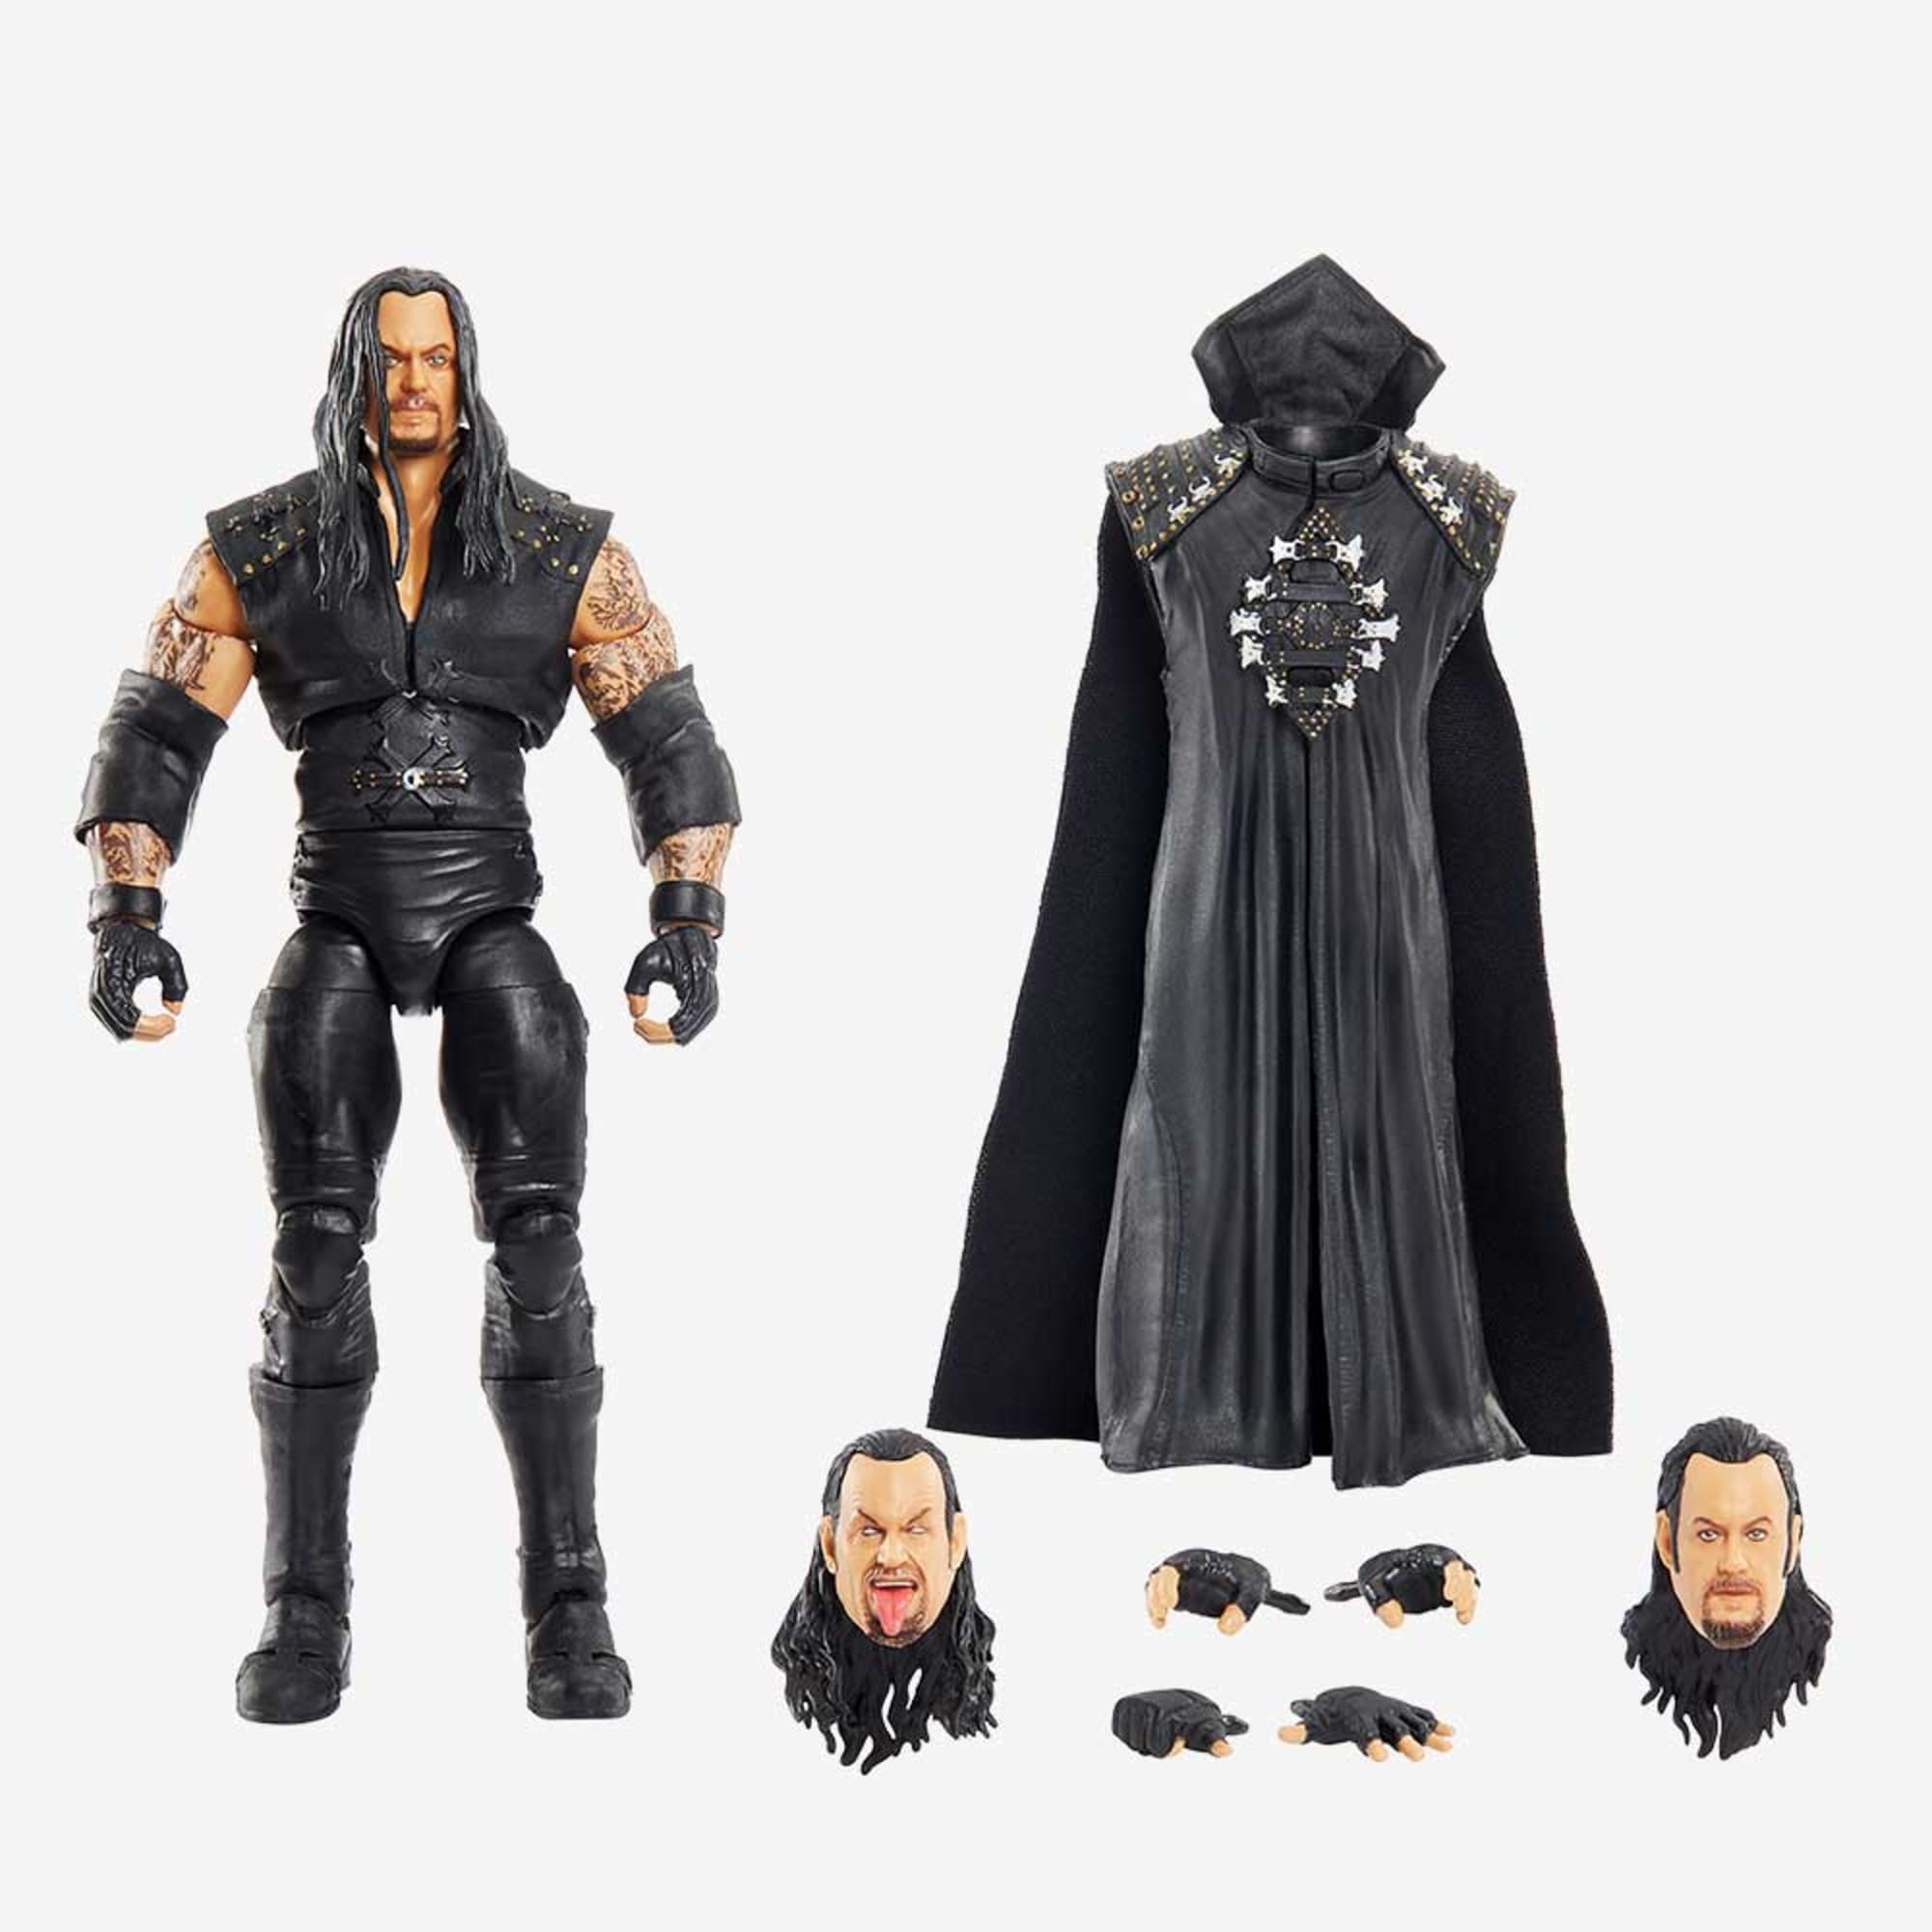 WWE Ultimate Edition Undertaker Action Figure